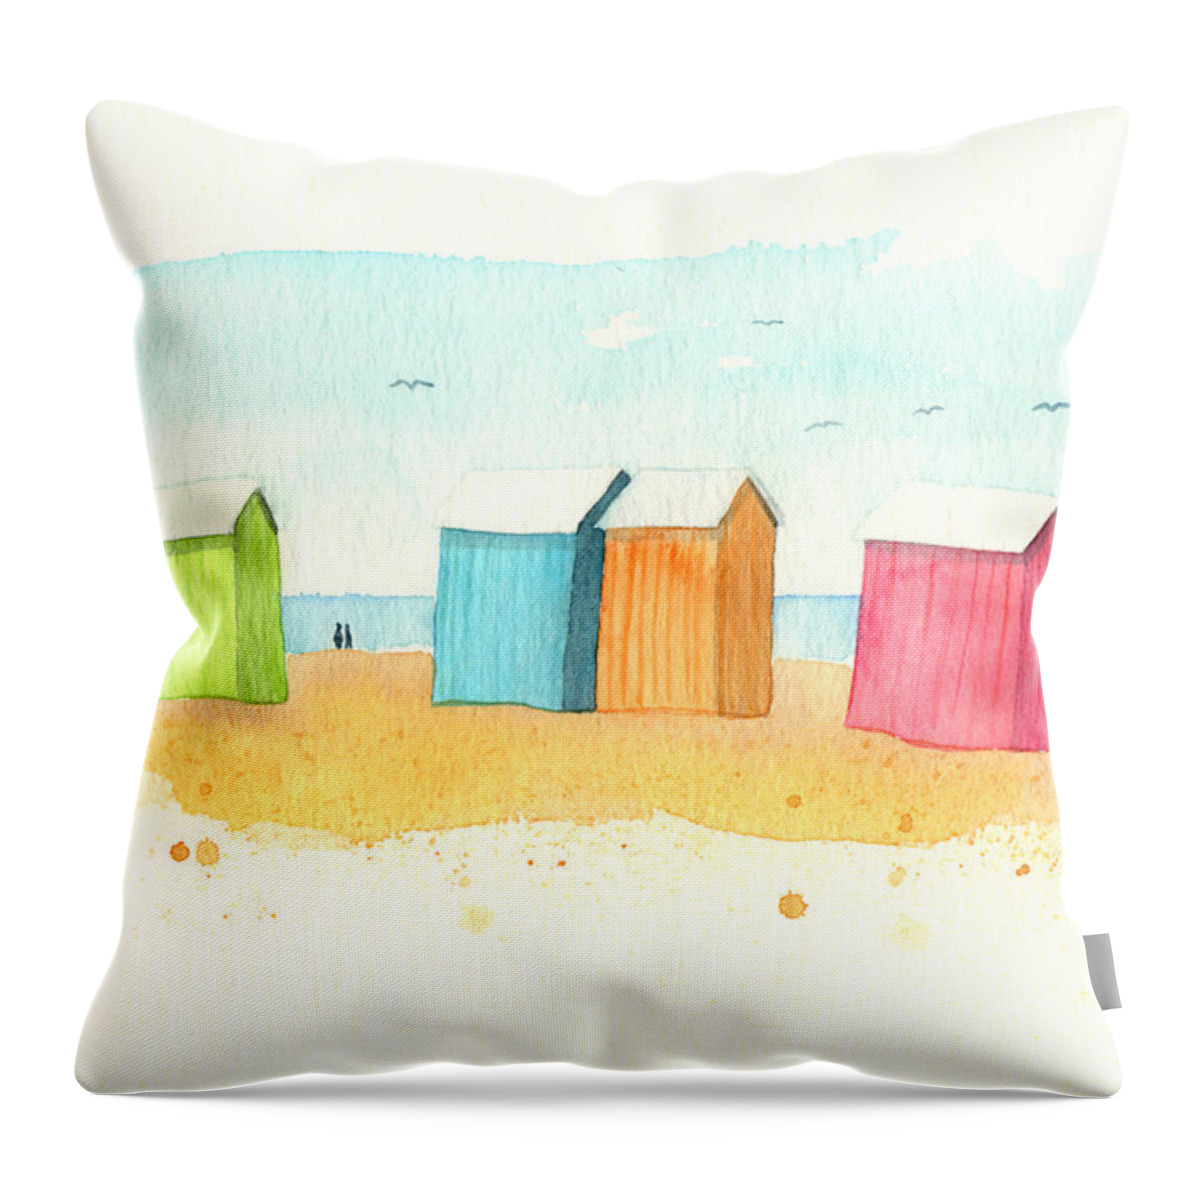 Watercolor Painting Throw Pillow featuring the digital art Multi Colored Beach Huts by Nautic By Nature. Watercolor Illustrations From The Seaside